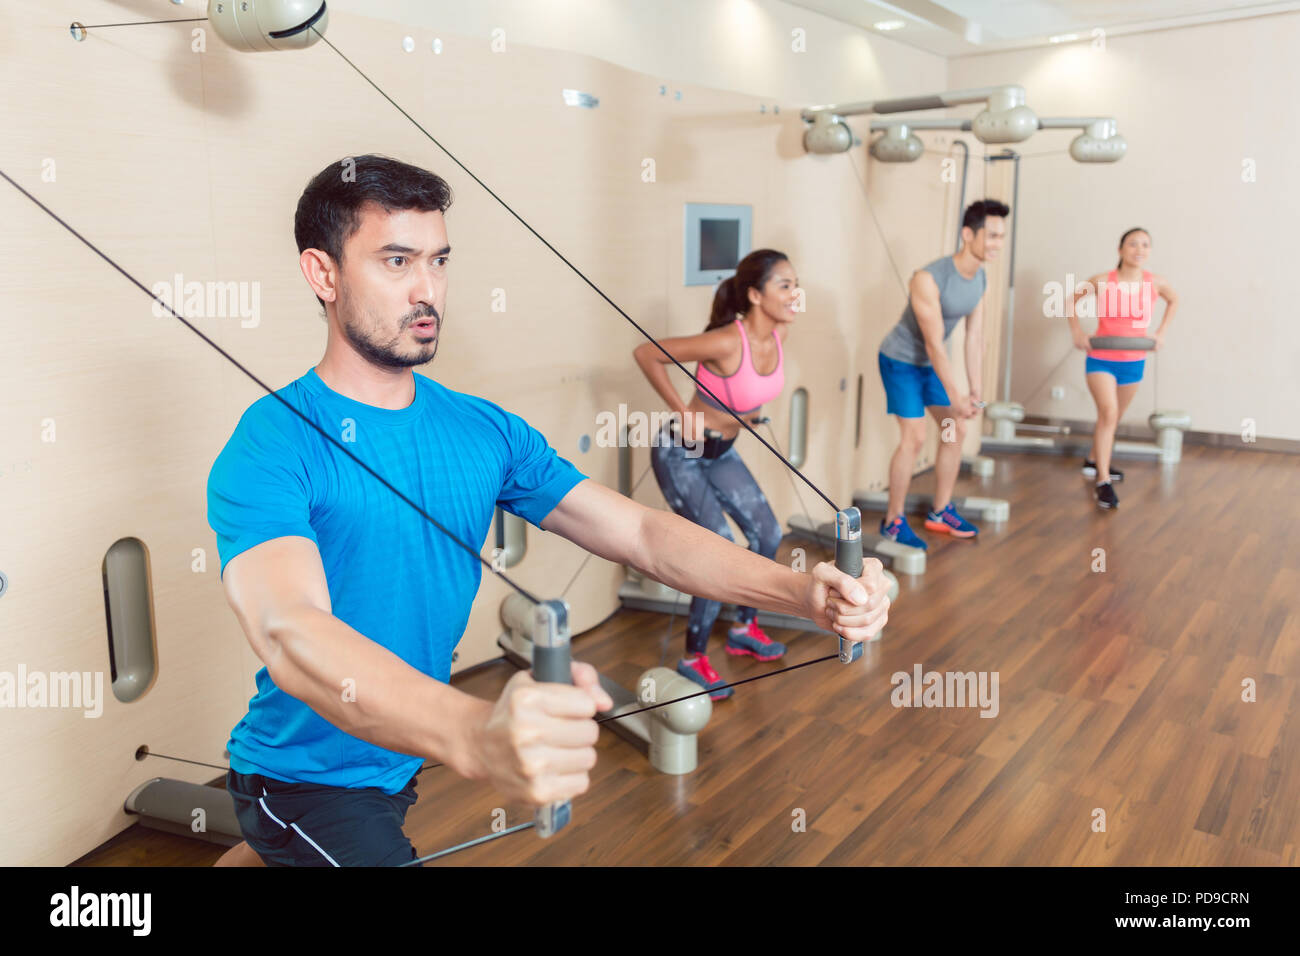 Determined young man exercising with resistance bands Stock Photo